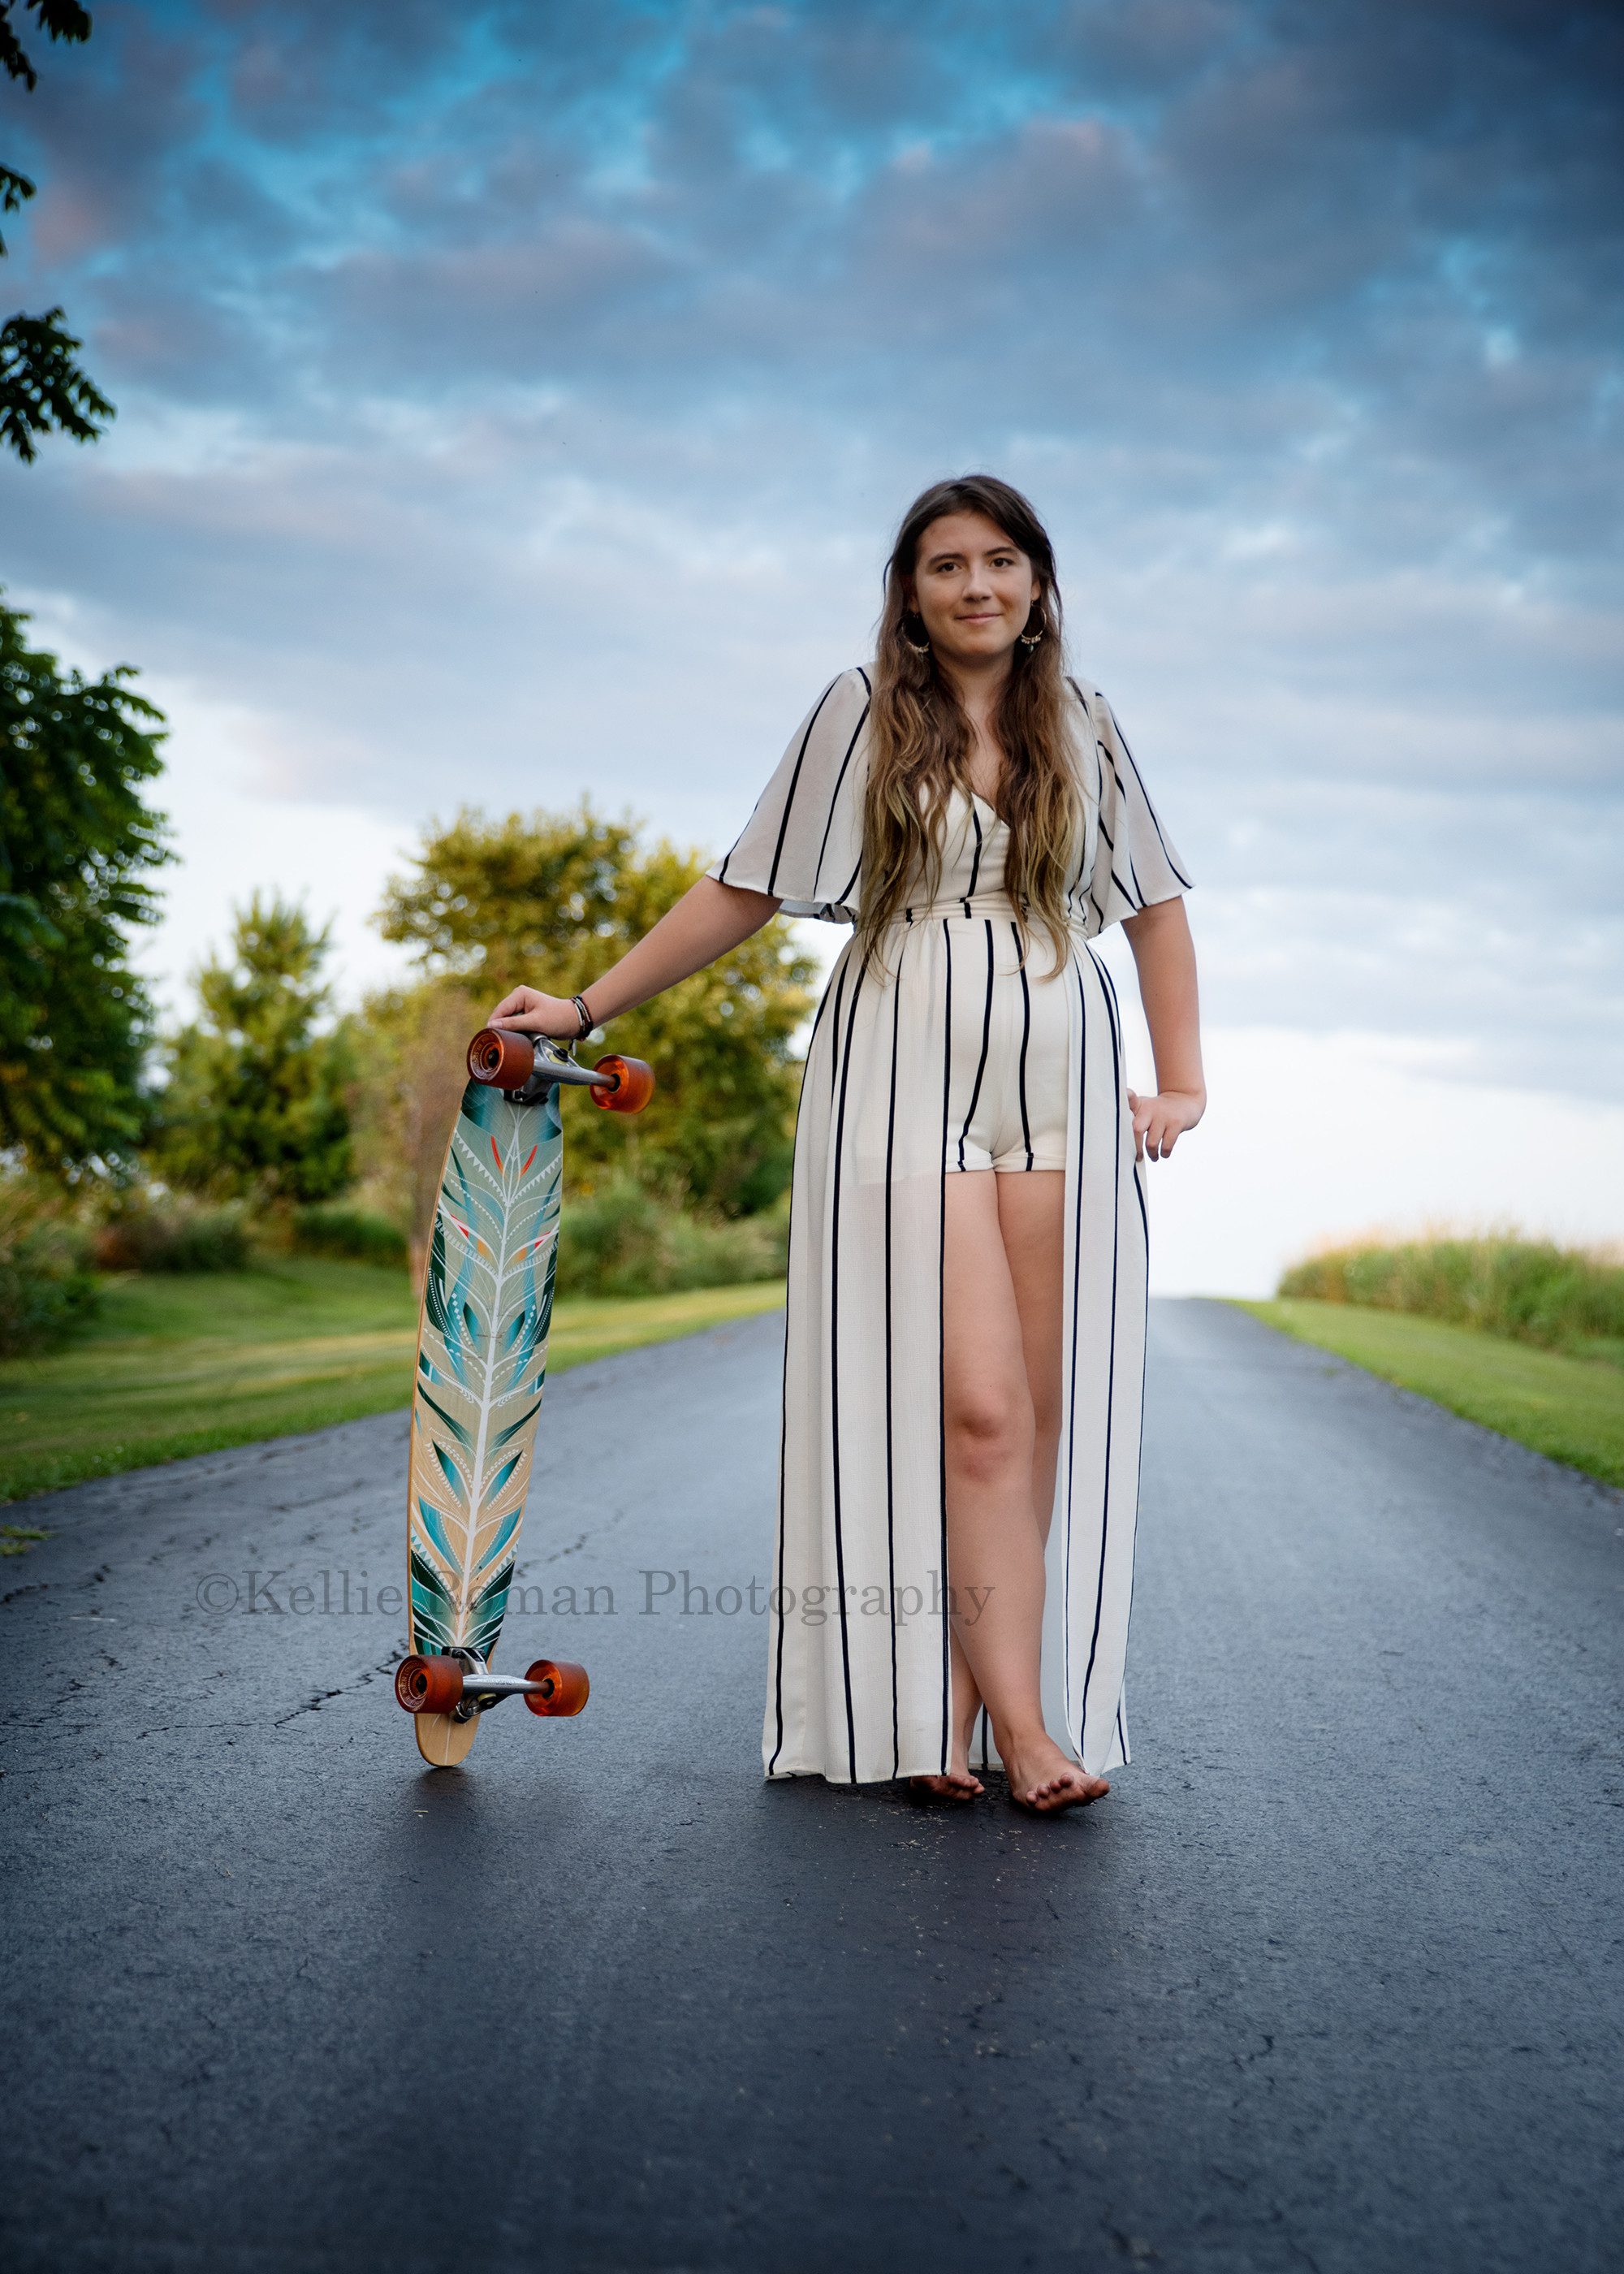 boho inspired a teenage girl with very long hair is stand on a blacktop driving she has her feet crossed in front of her and is leaning to one side on a very colorful skateboard that is standing upright she has a romper shorts outfit on